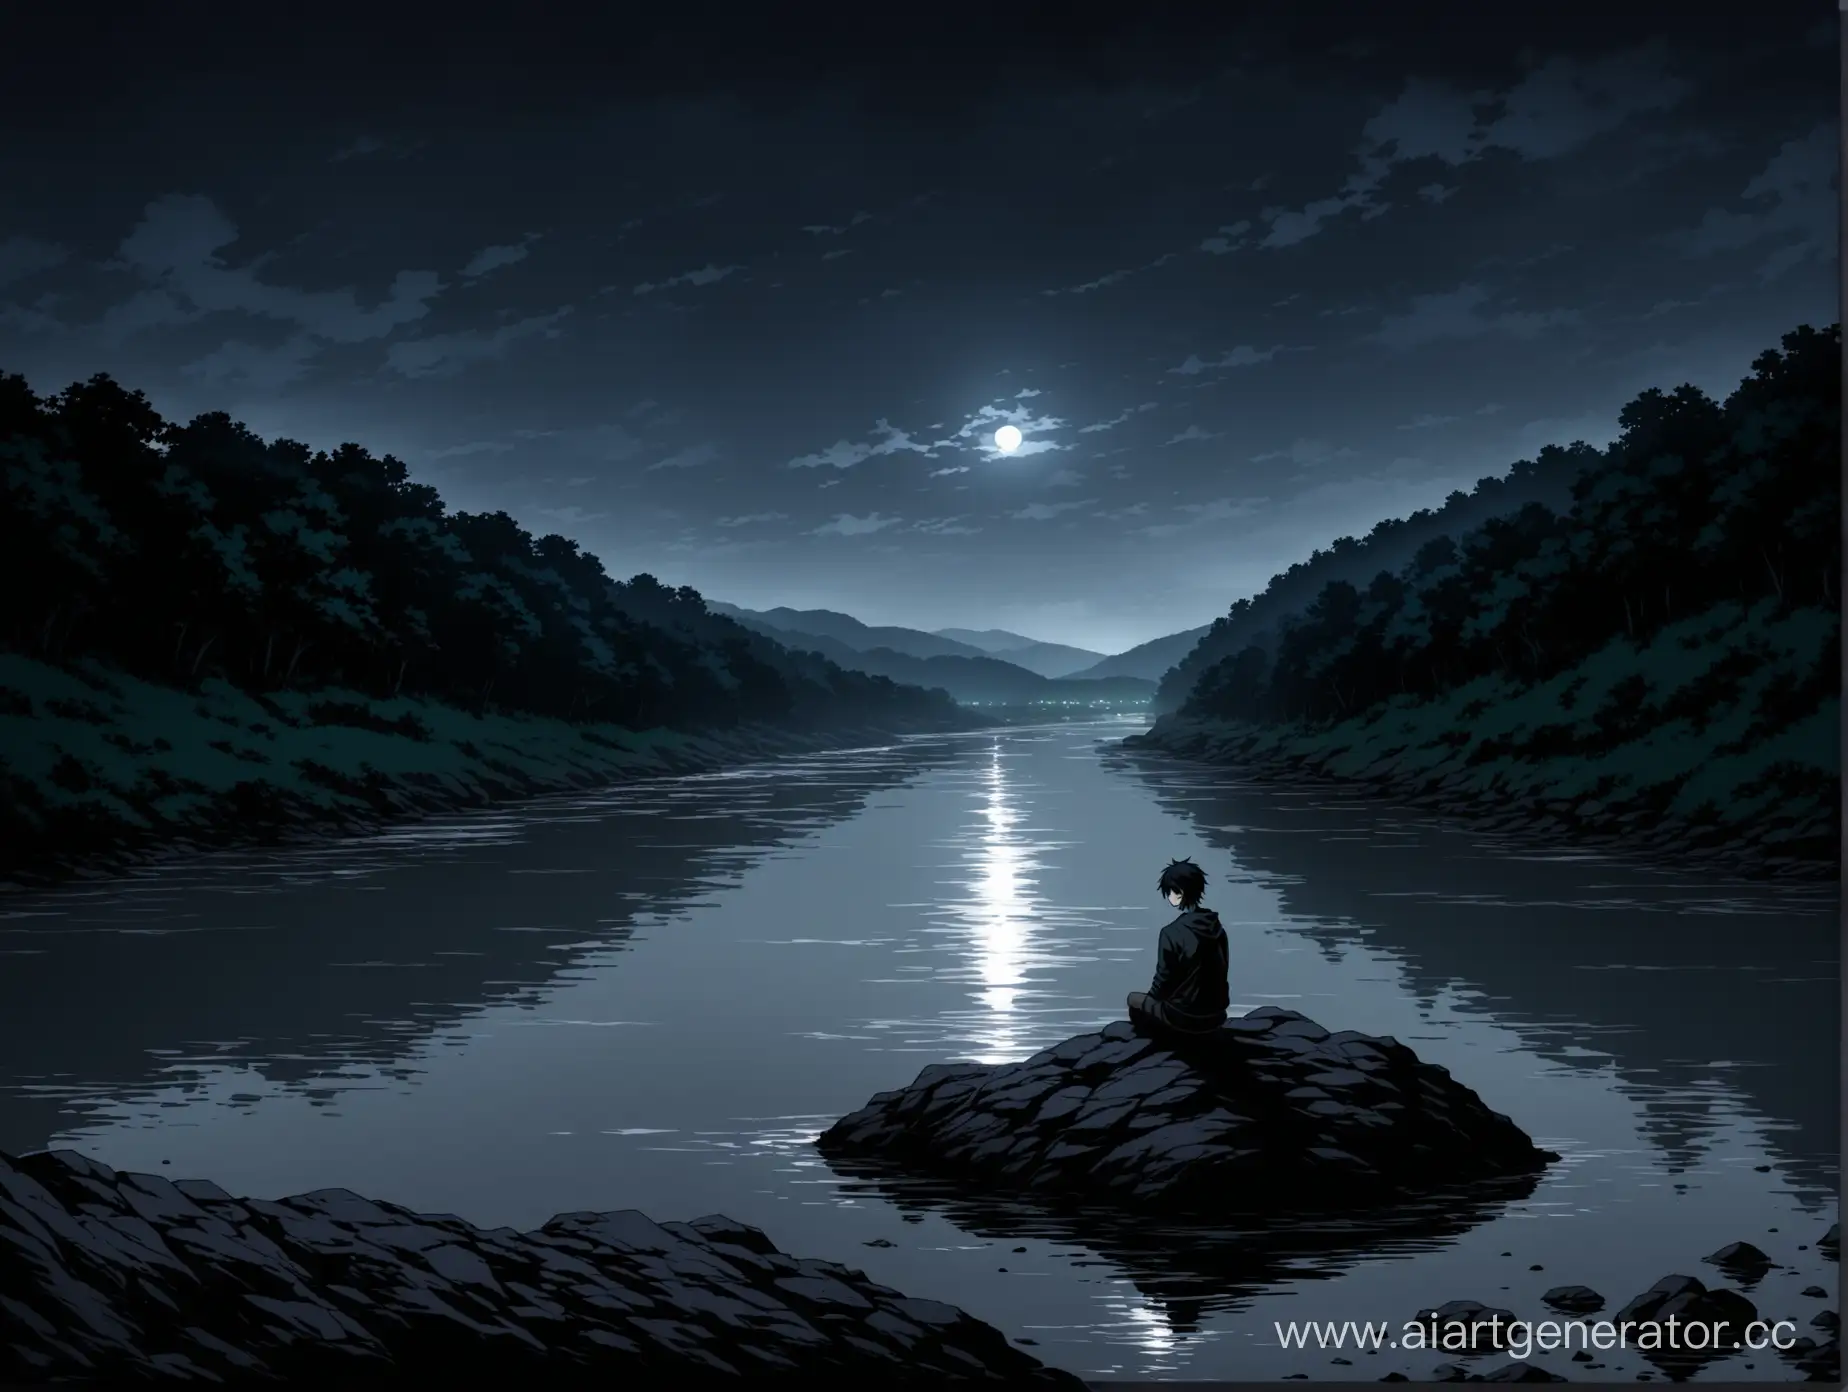 Brooding-Anime-Character-Contemplating-by-the-Dark-River